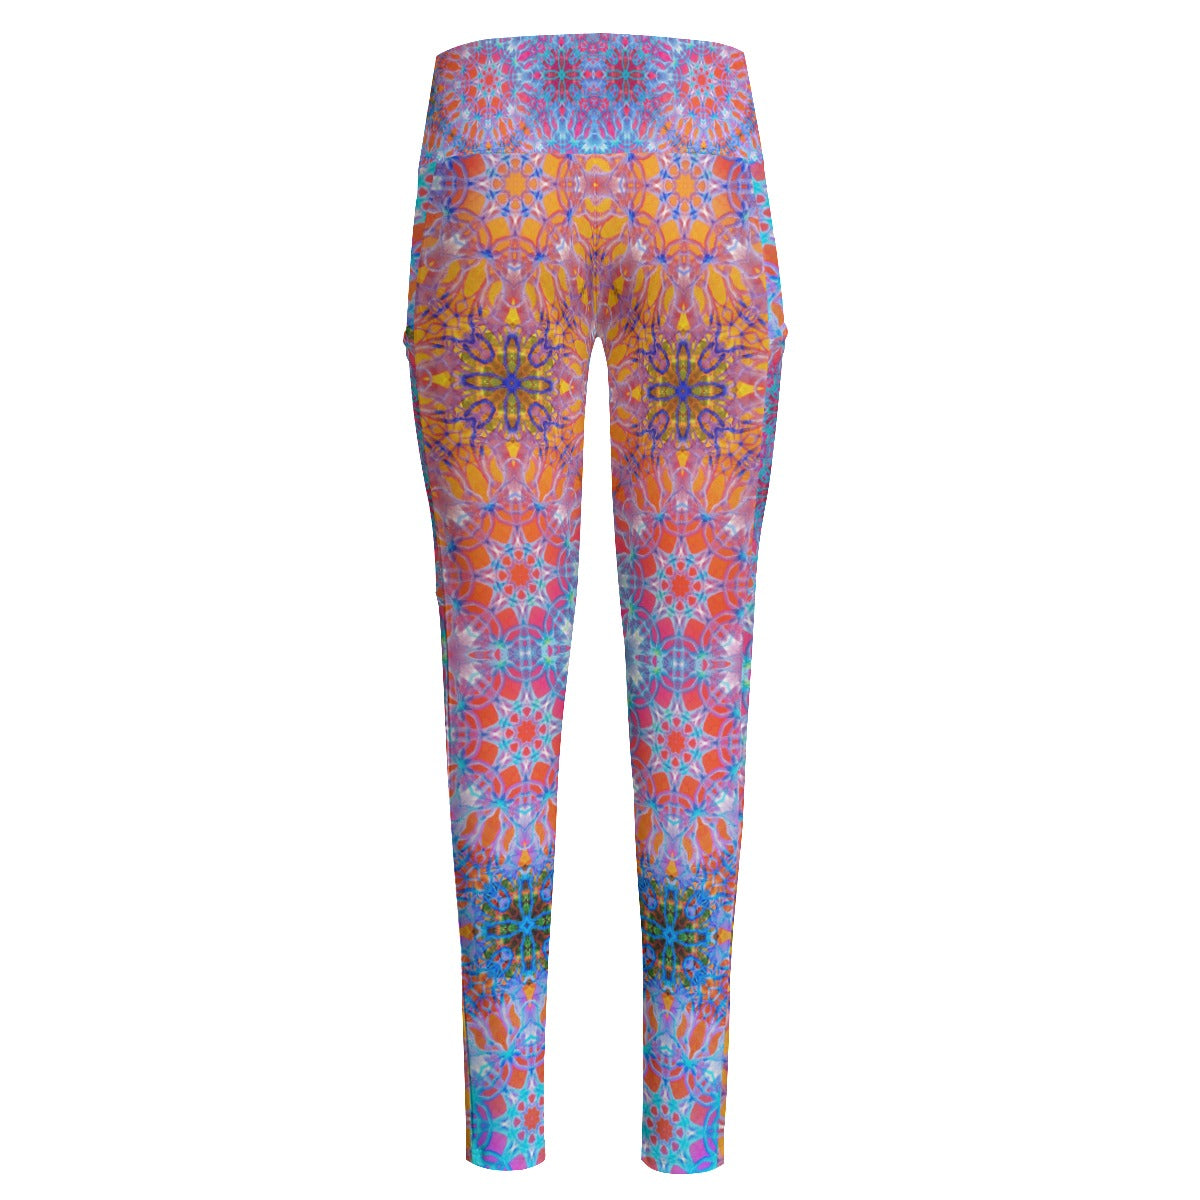 Psychedelic Warrior High Waist Leggings With Side Pockets